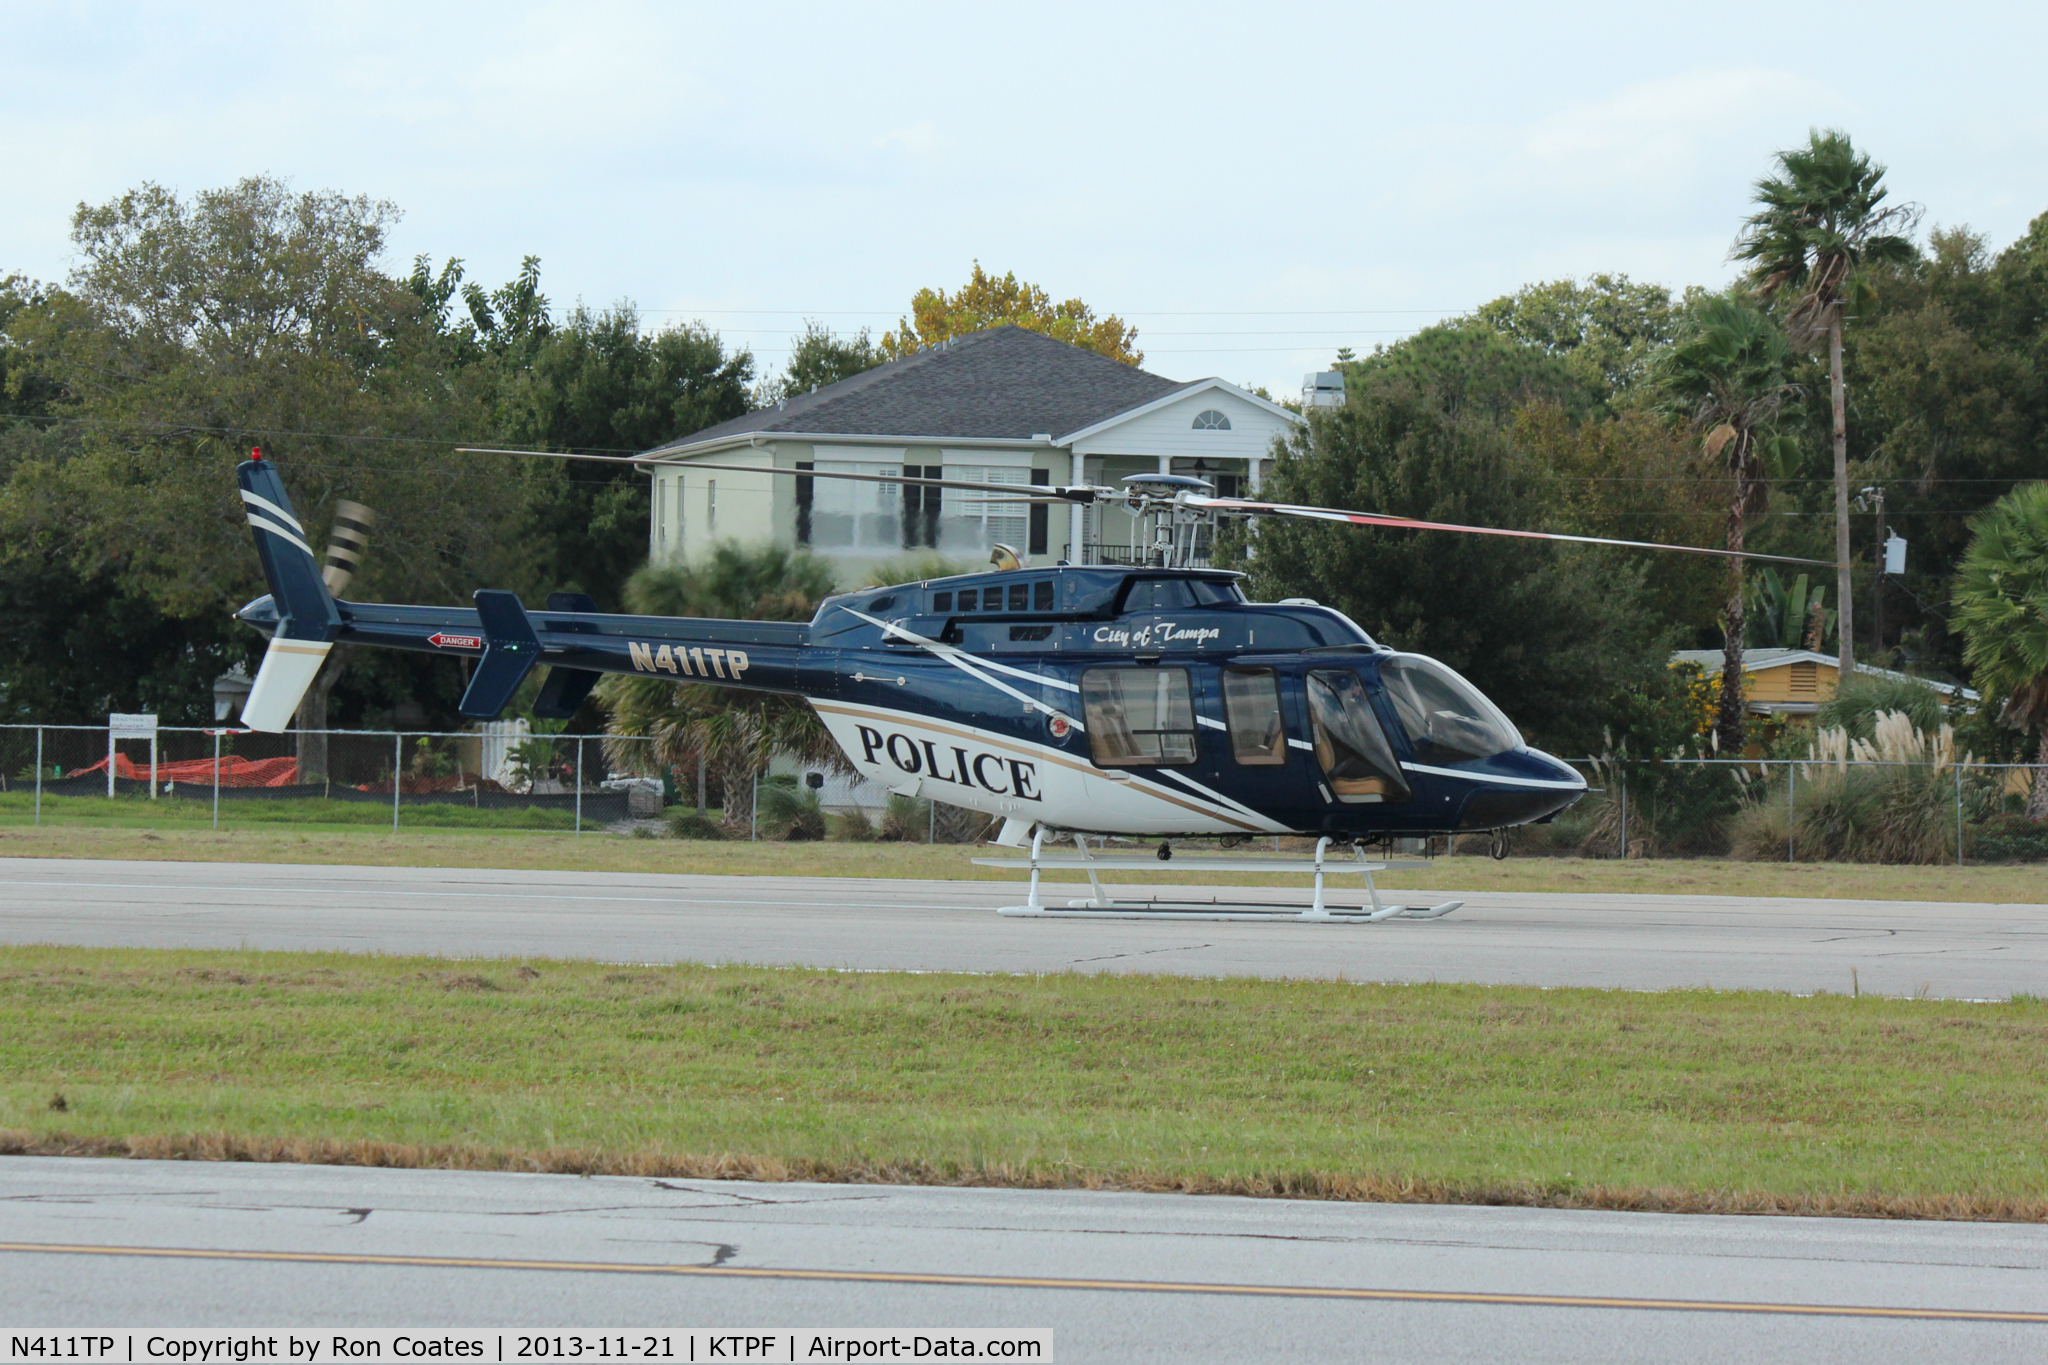 N411TP, 2001 Bell 407 C/N 53487, This Tampa Police Bell 407 is practicing landings at the Peter O Knight Airport on Tampa's Davis Island